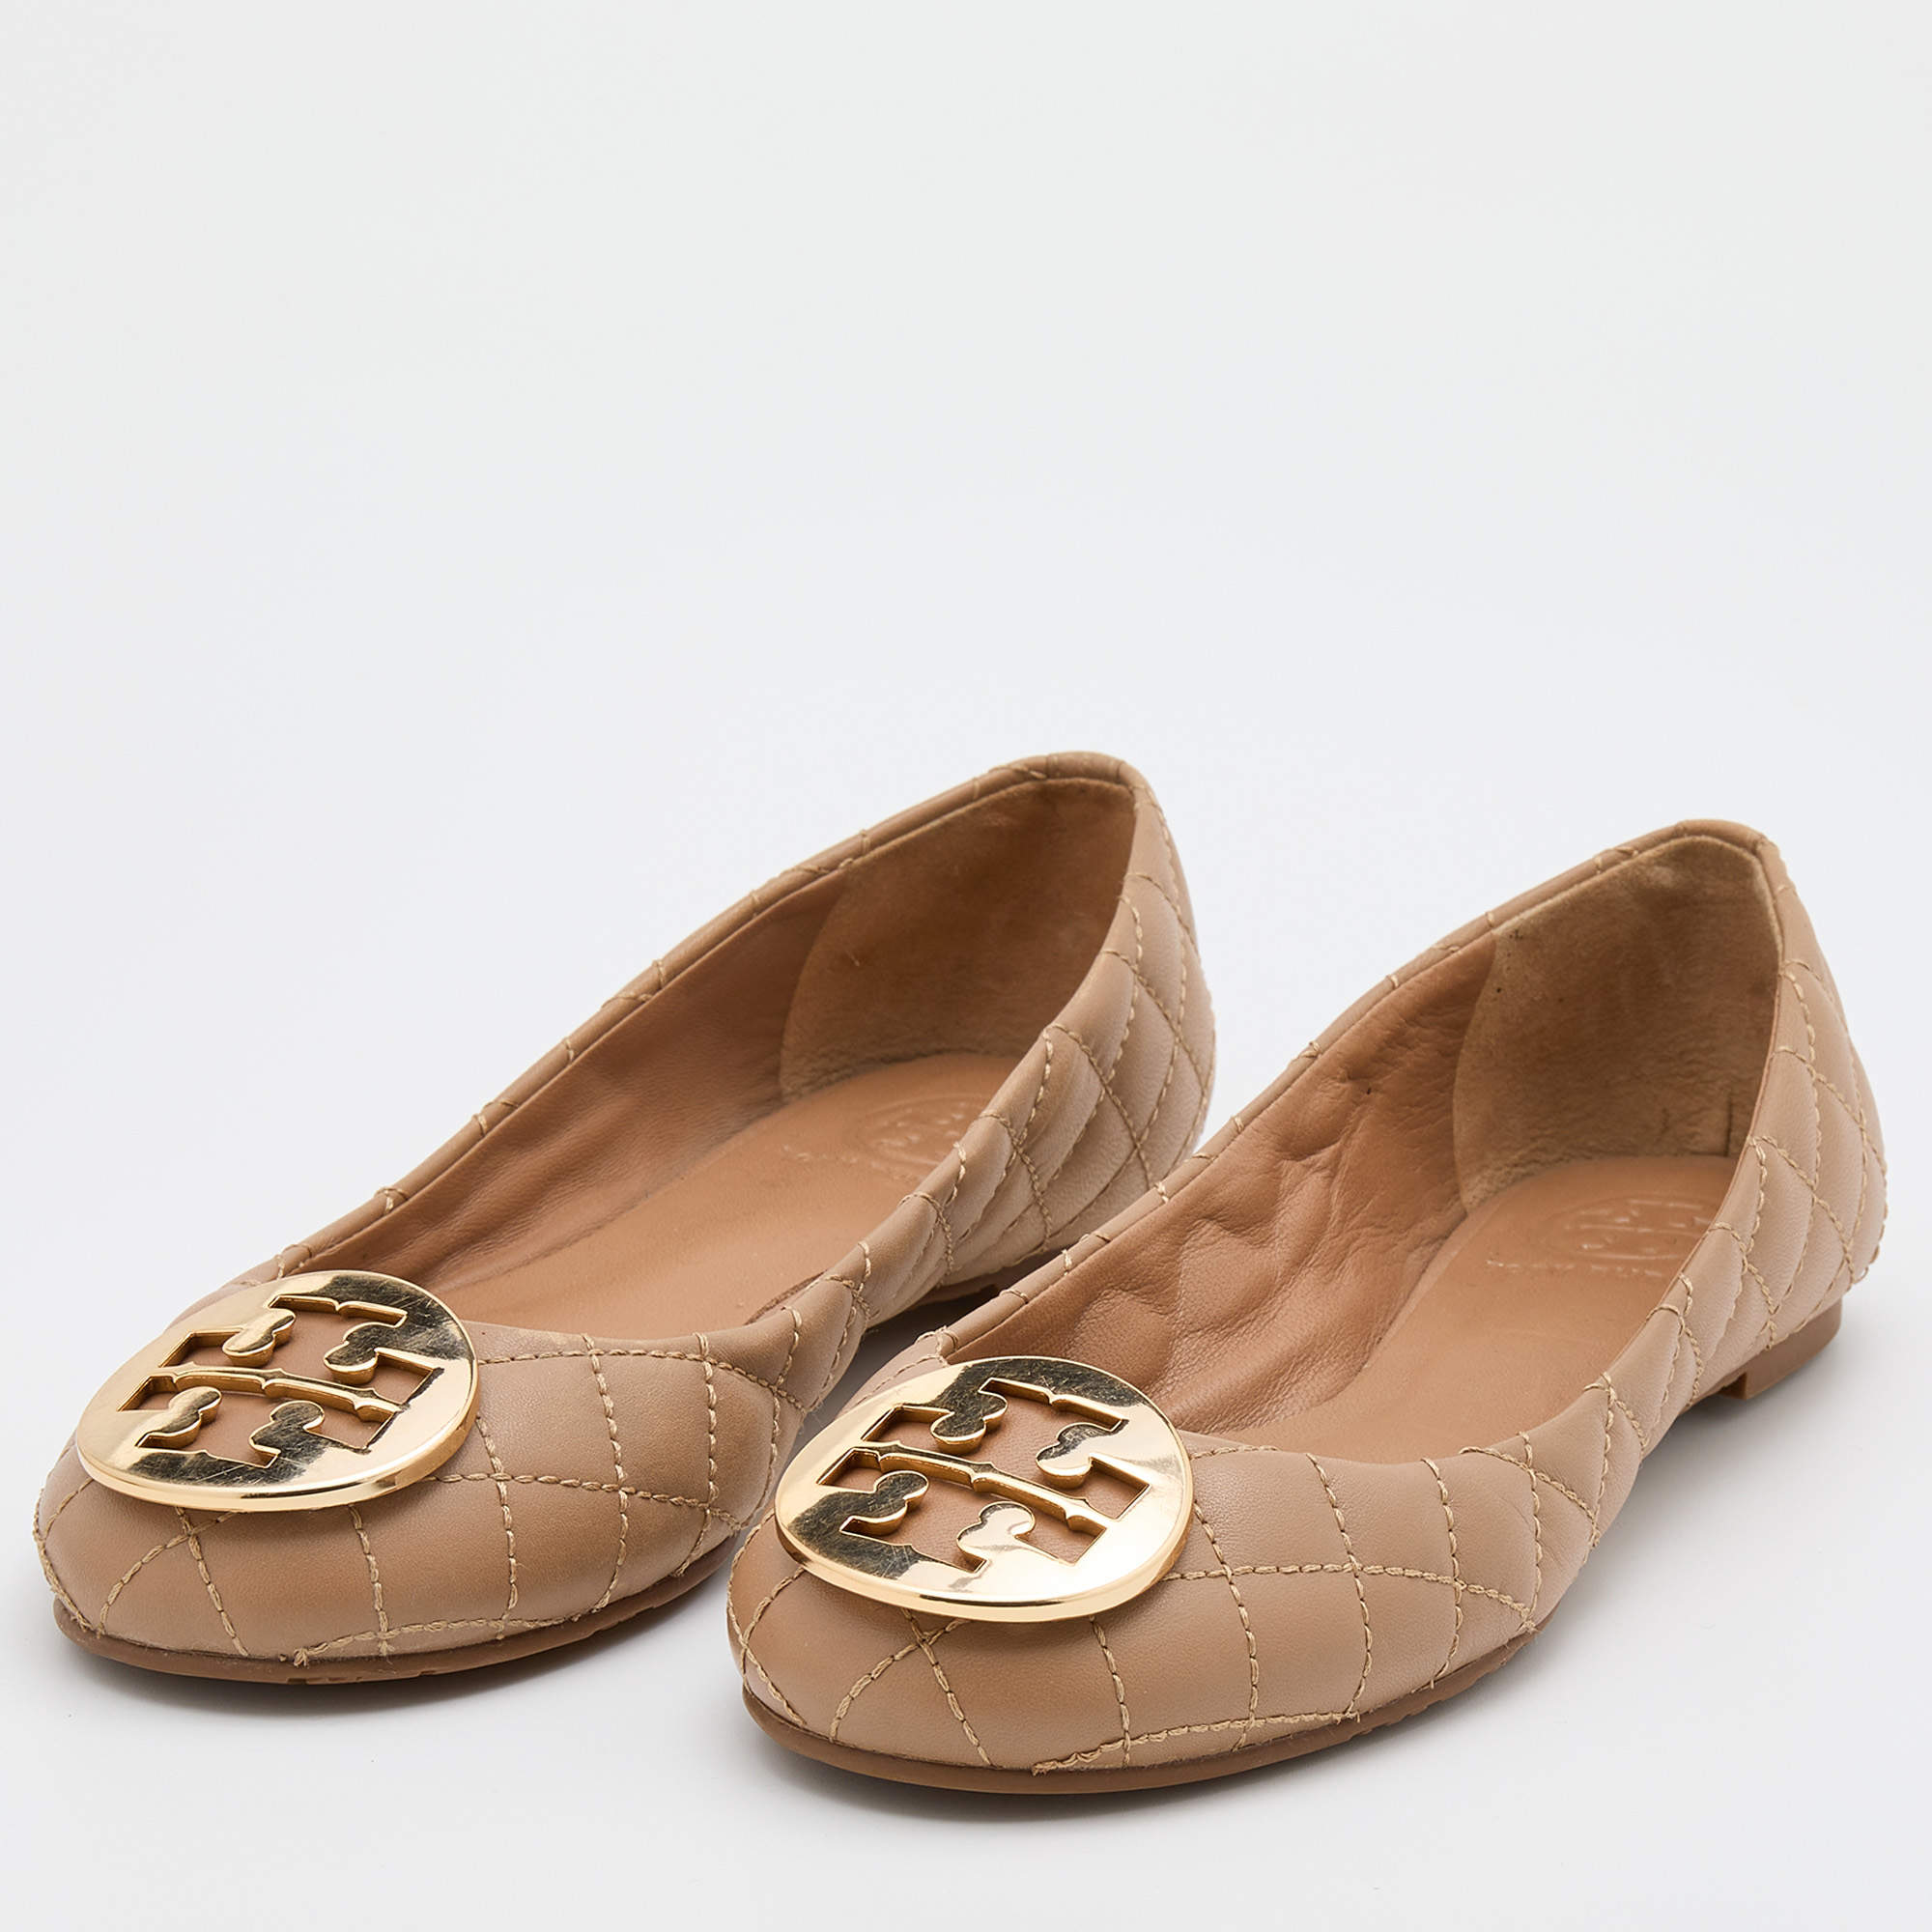 Tory Burch Beige Quilted Leather Quinn Ballet Flats Size 37 Tory Burch | TLC